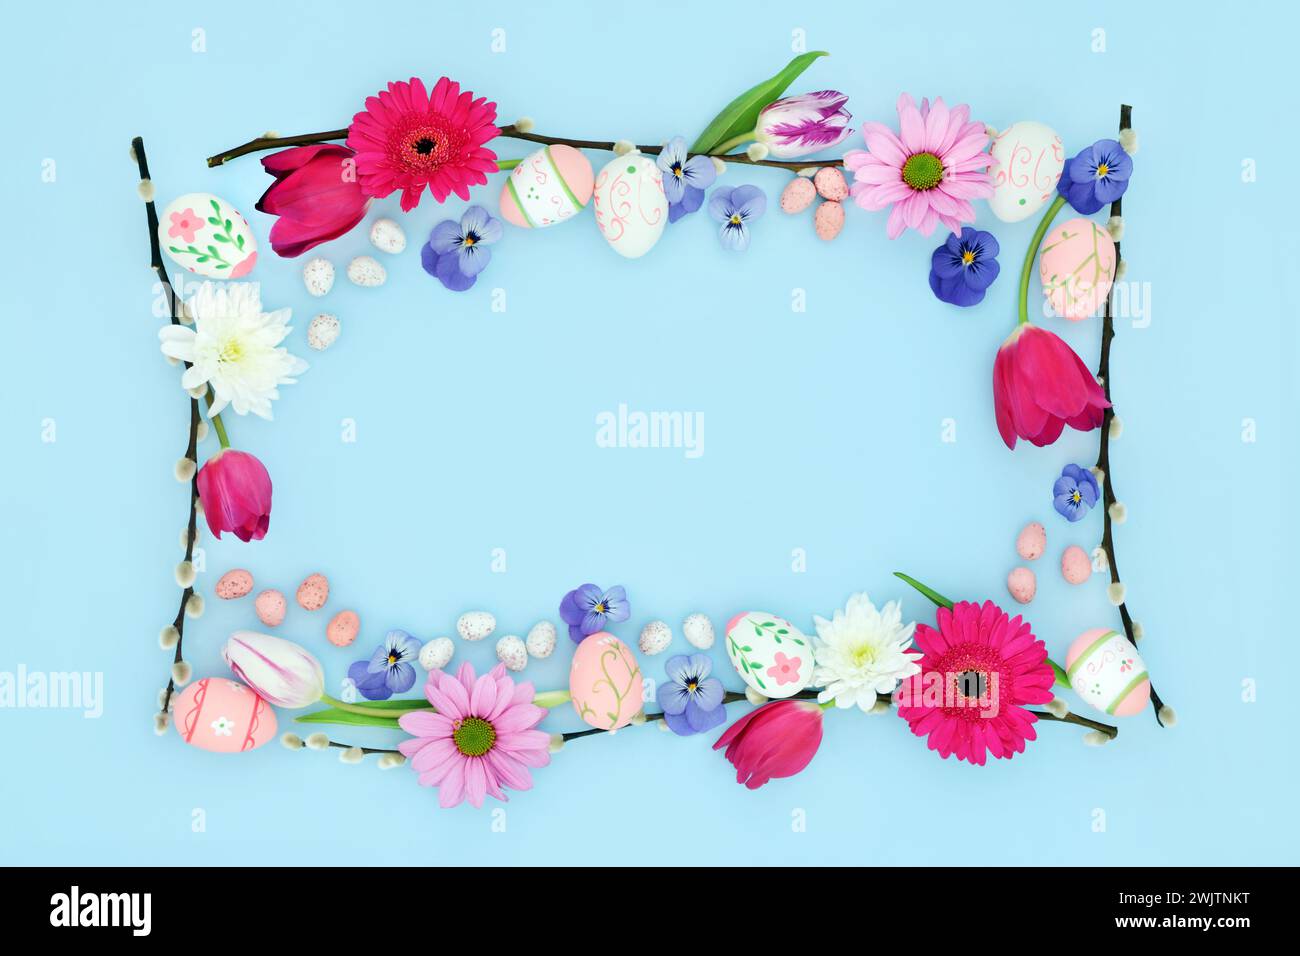 Happy Easter background border with edible and decorative eggs, flowers and willow branches on pastel blue. Flat lay. Natural nature frame design. Stock Photo